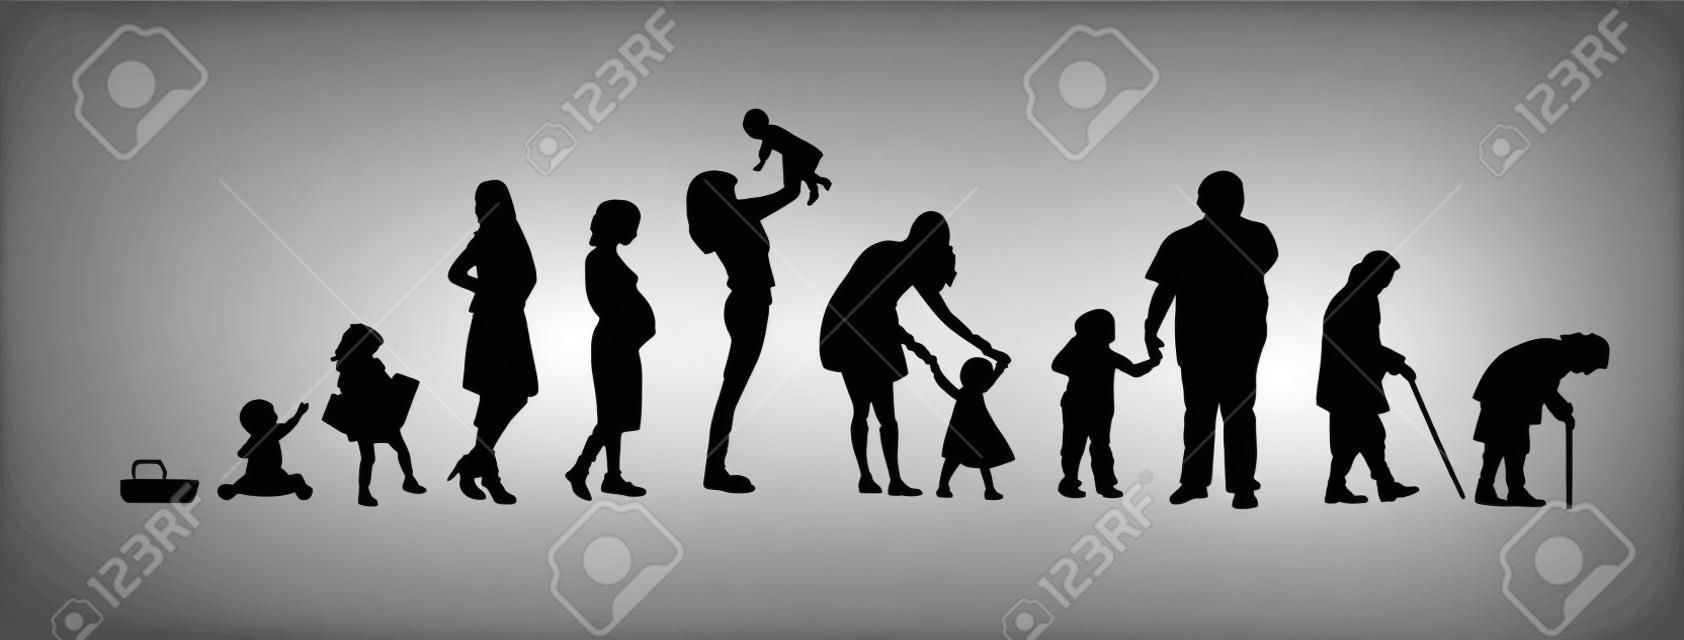 Silhouettes of people. The cycle of life. Vector